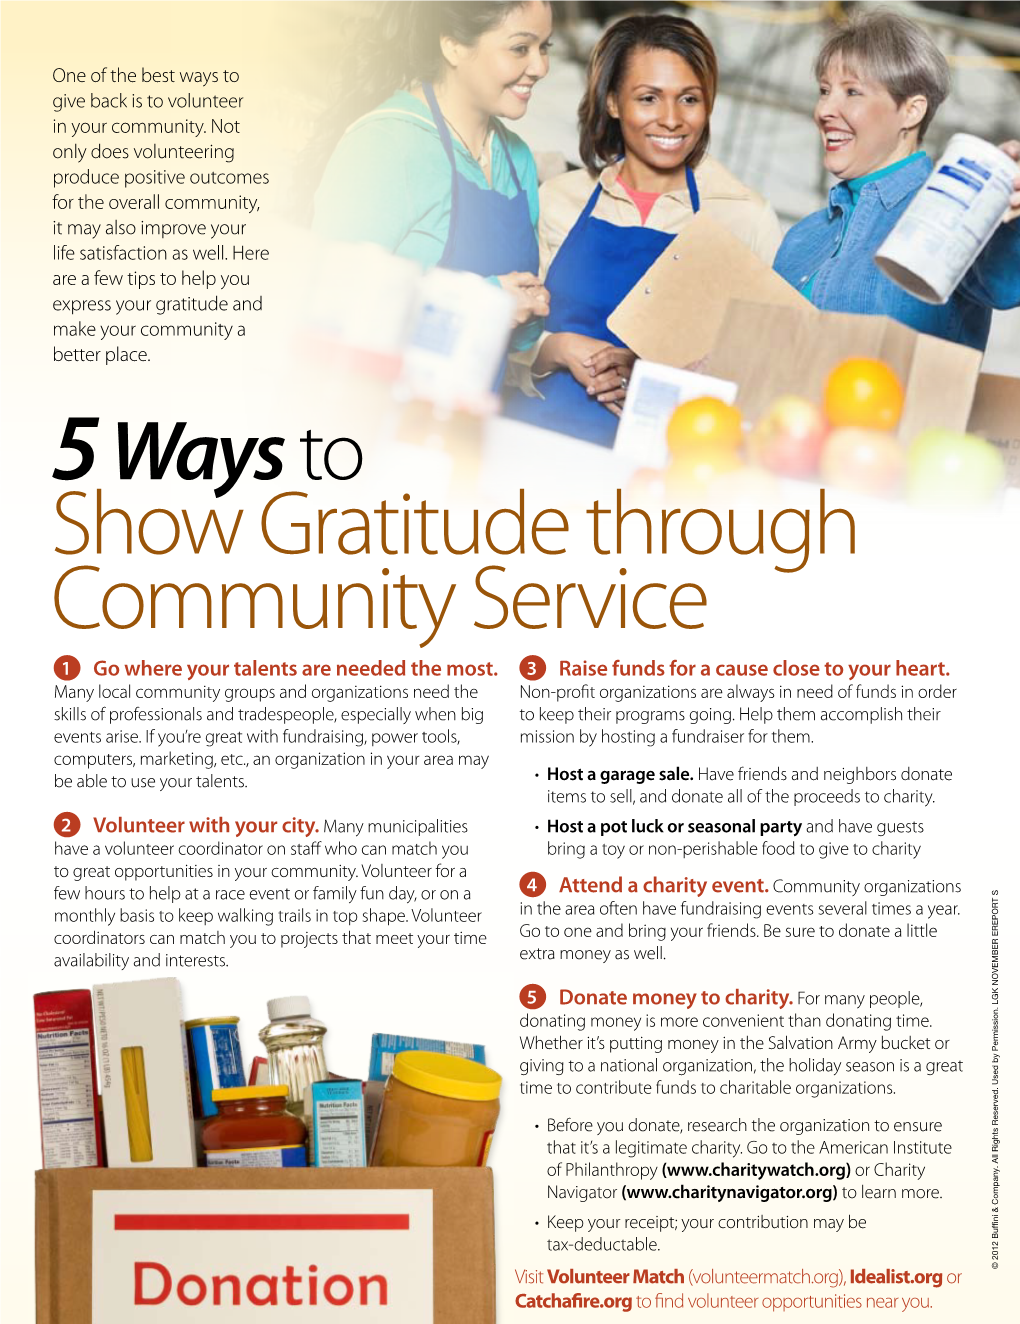 Show Gratitude Through Community Service 1 Go Where Your Talents Are Needed the Most